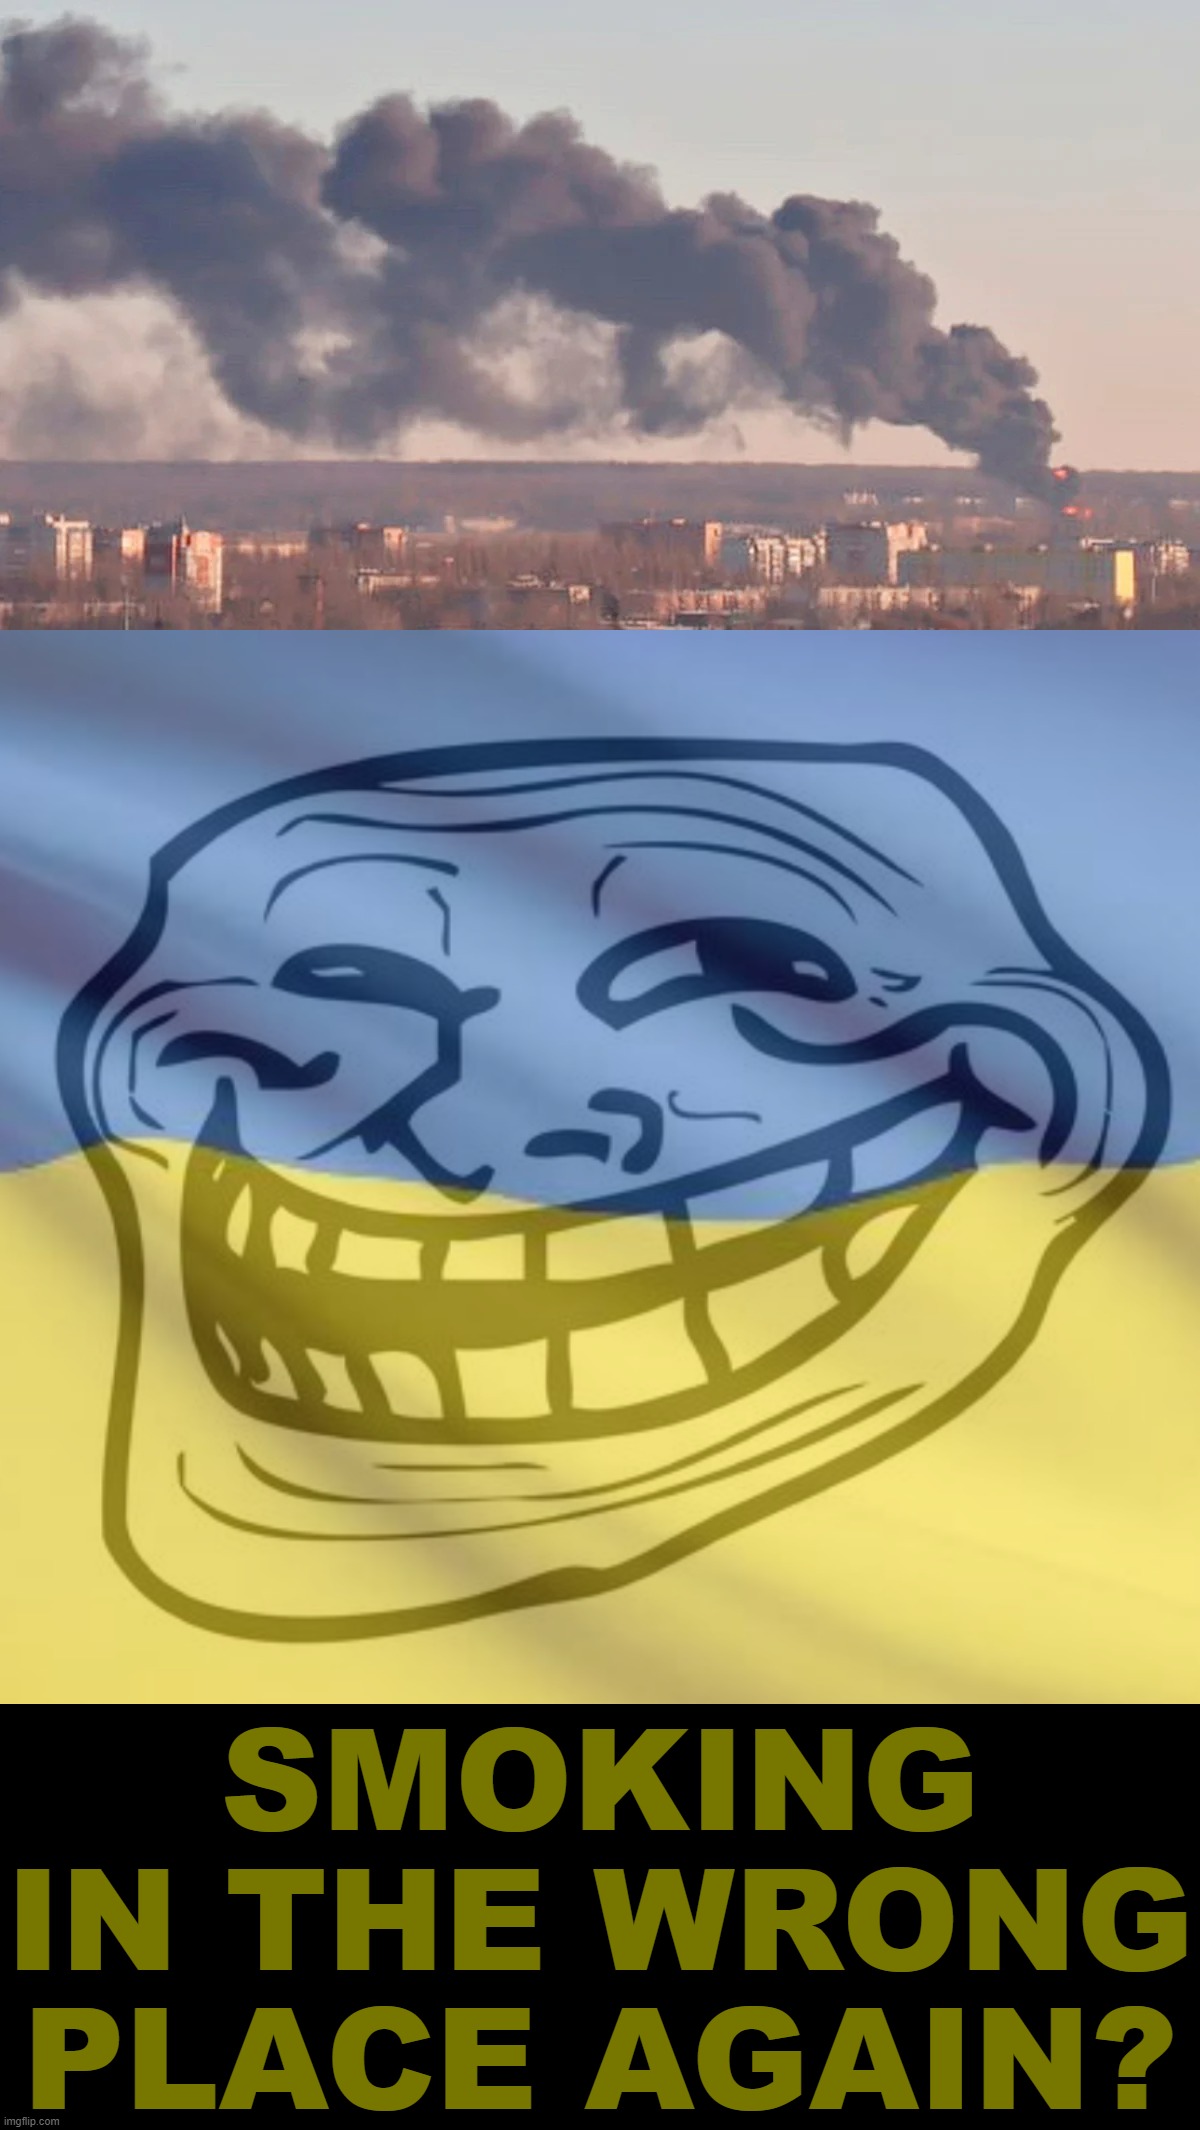 Apparently, Russia's difficulties enforcing its "no smoking" policy extend hundreds of miles behind its lines | SMOKING IN THE WRONG PLACE AGAIN? | image tagged in ukrainian missile strike in russia,ukrainian trollface,ukraine,russia,no smoking,discipline | made w/ Imgflip meme maker